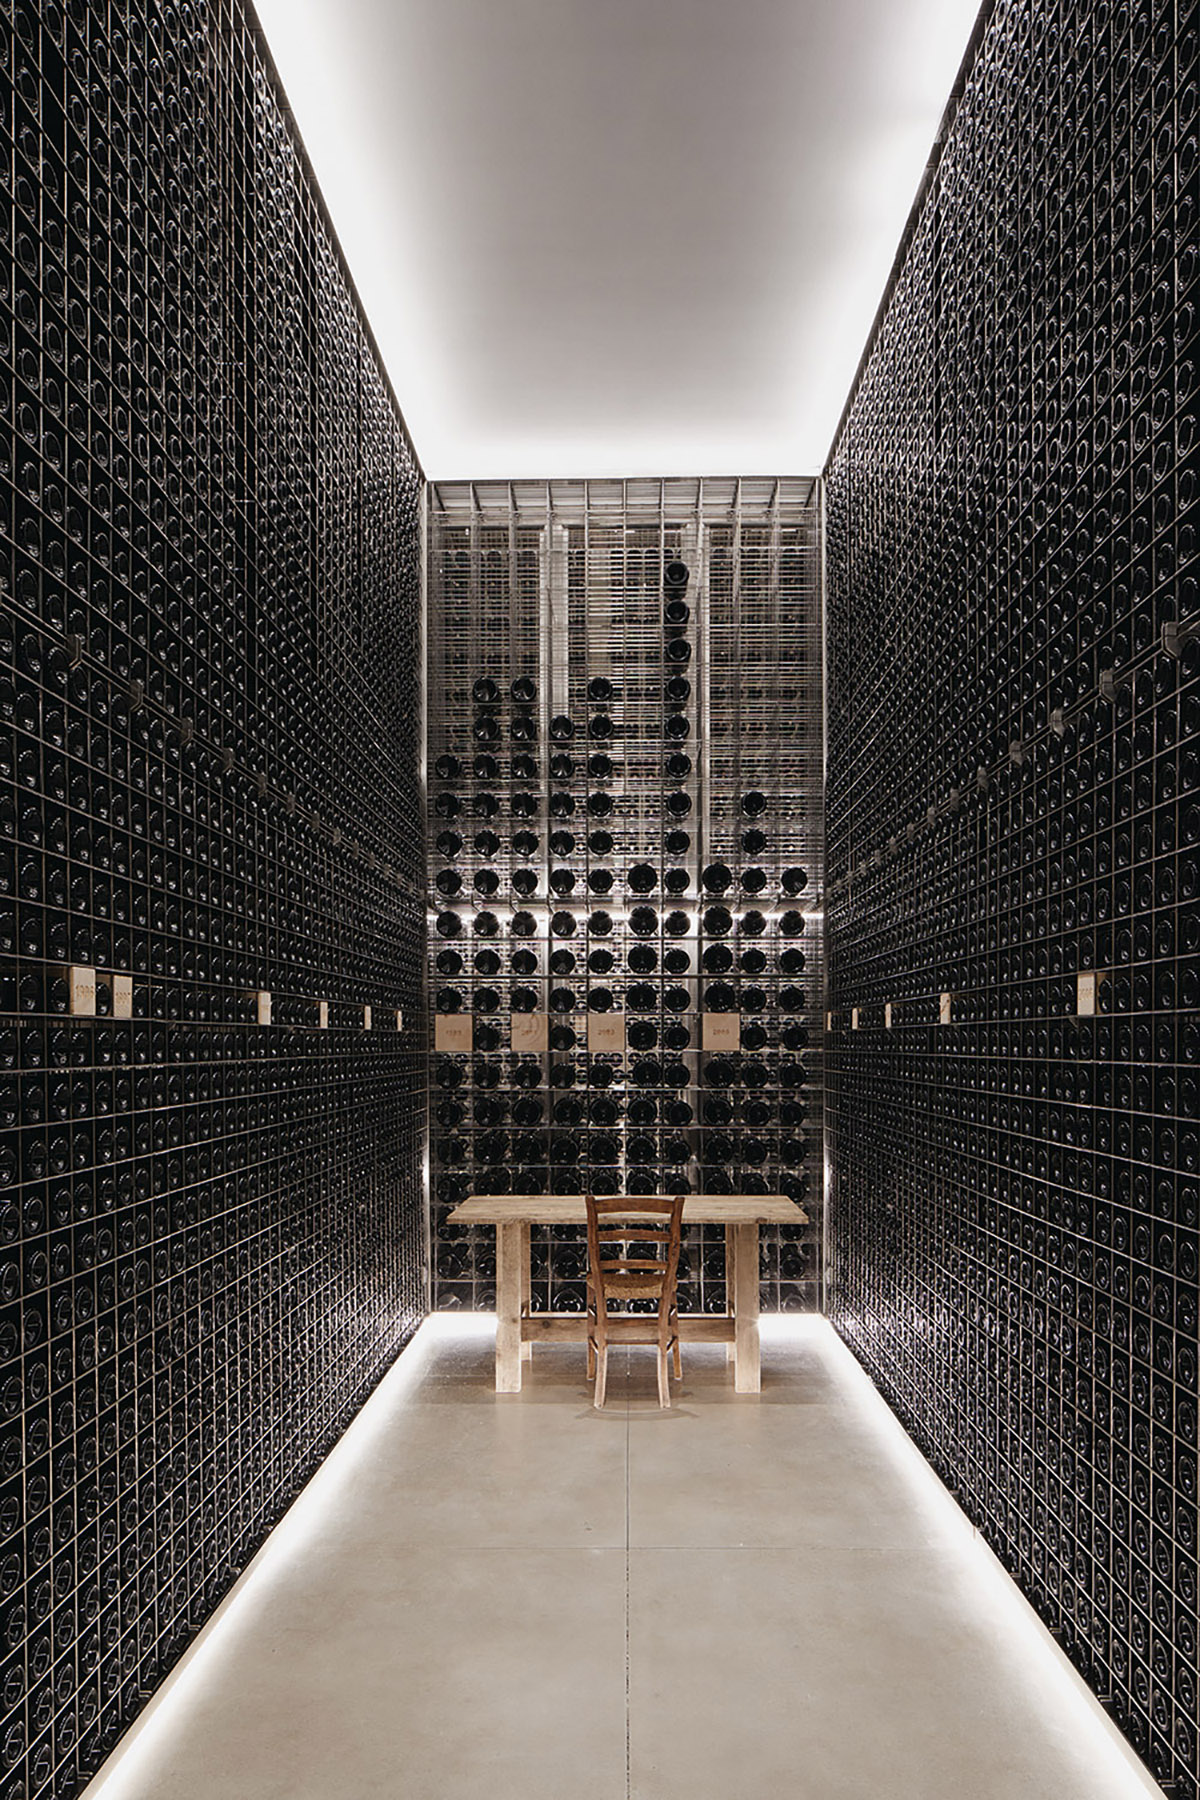 A slim wine cellar with bottles from ceiling to ground